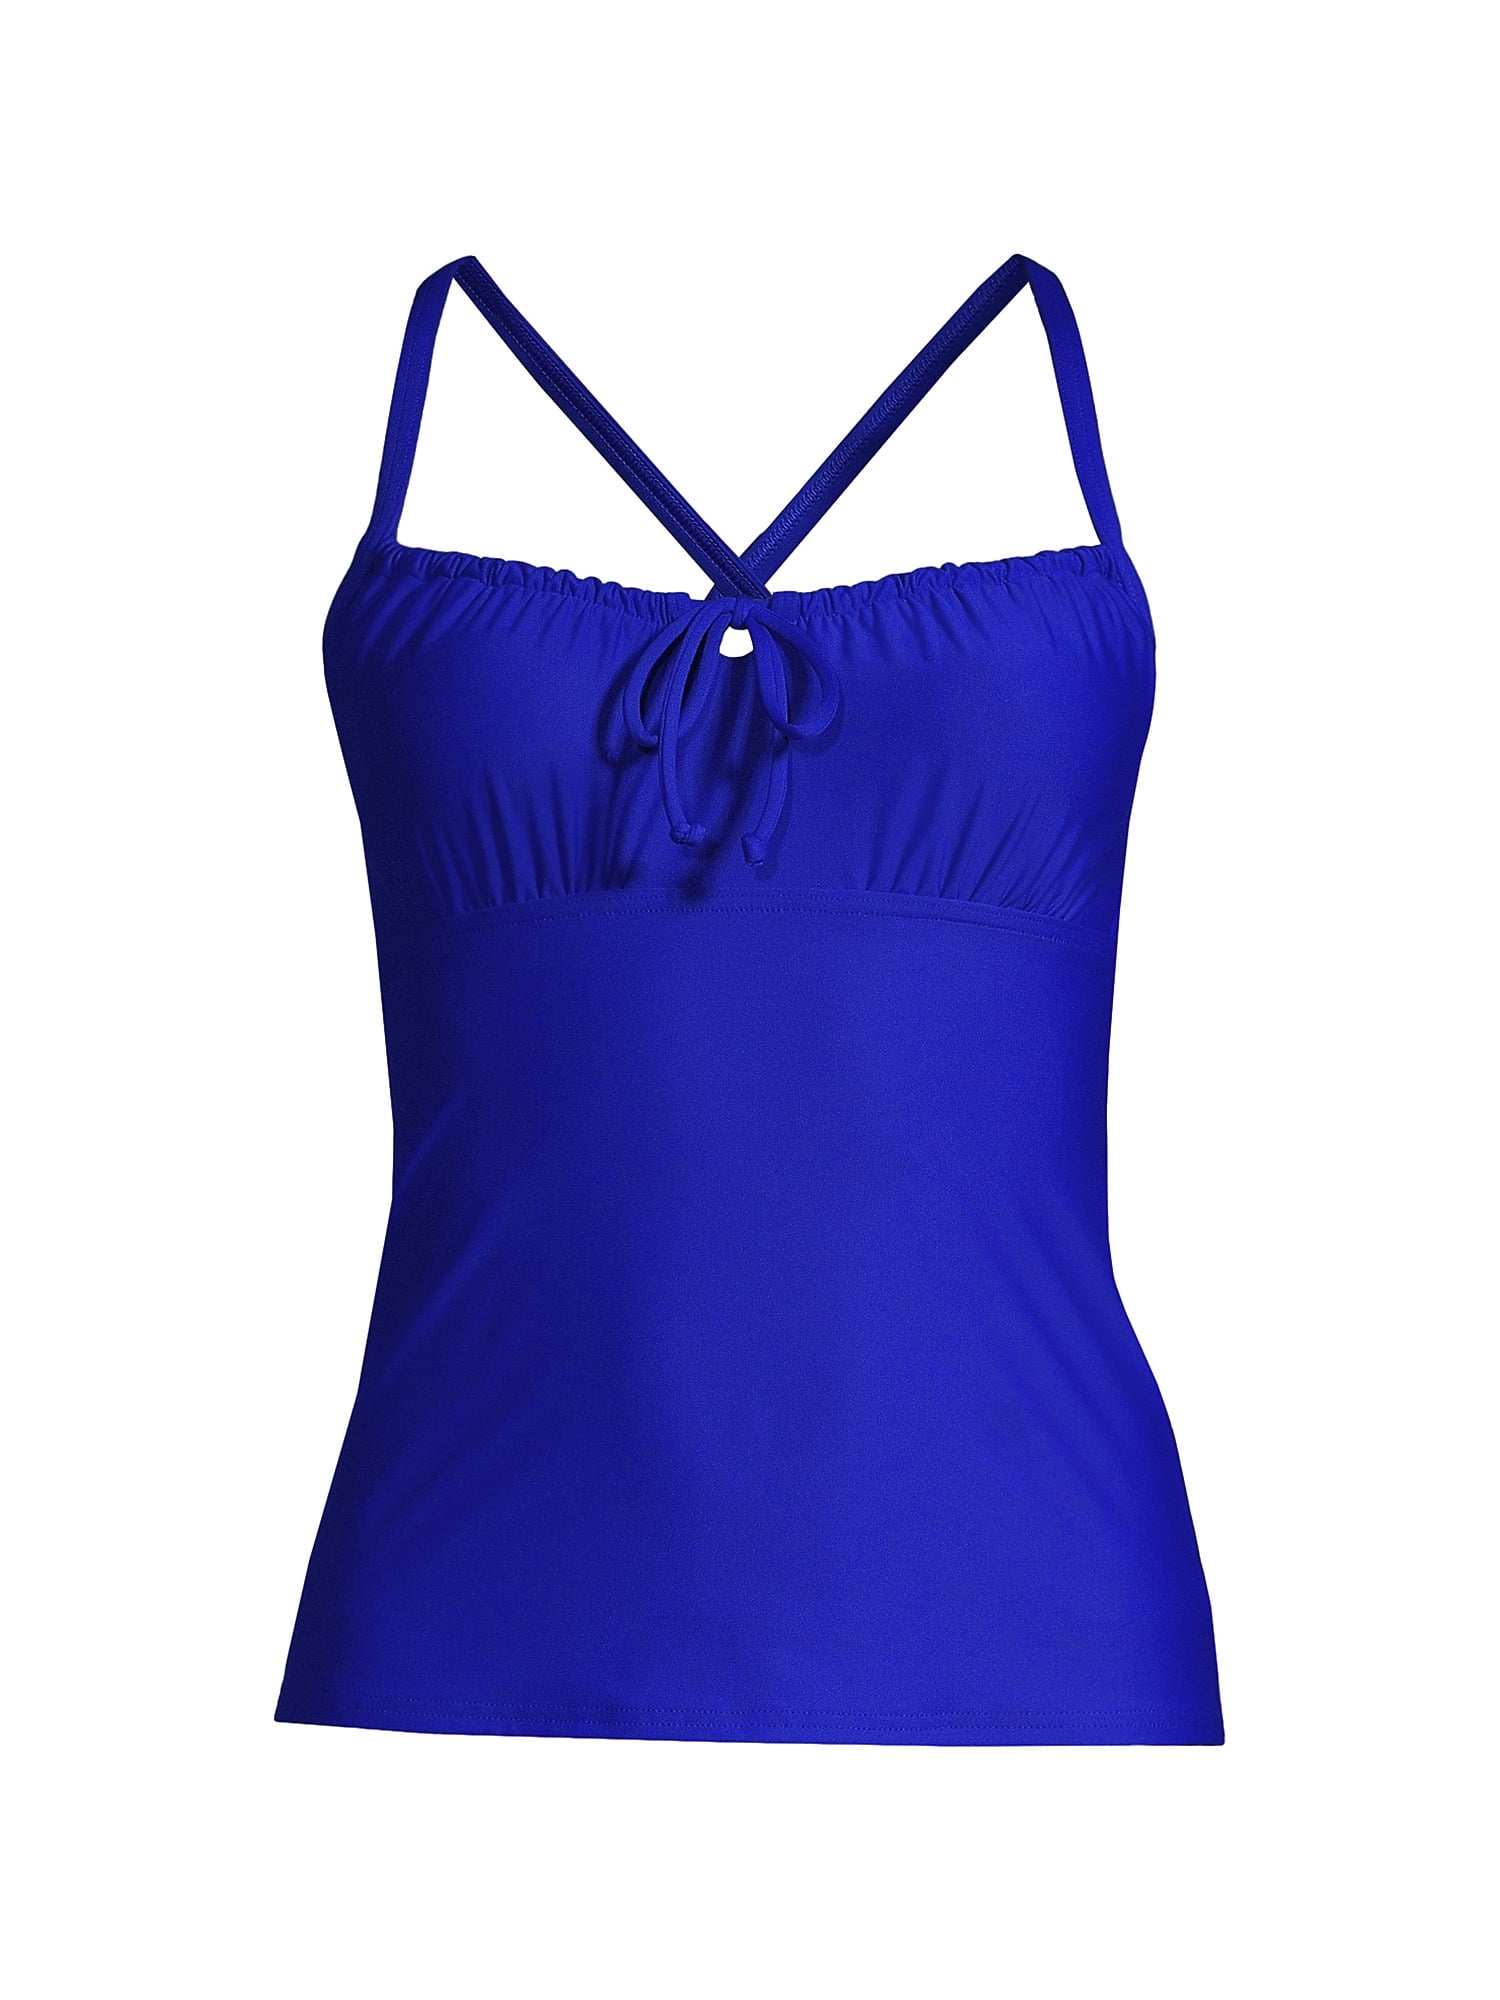 Lands' End Women's DD-Cup Chlorine Resistant Tie Front Underwire Tankini  Top Swimsuit Adjustable Straps 